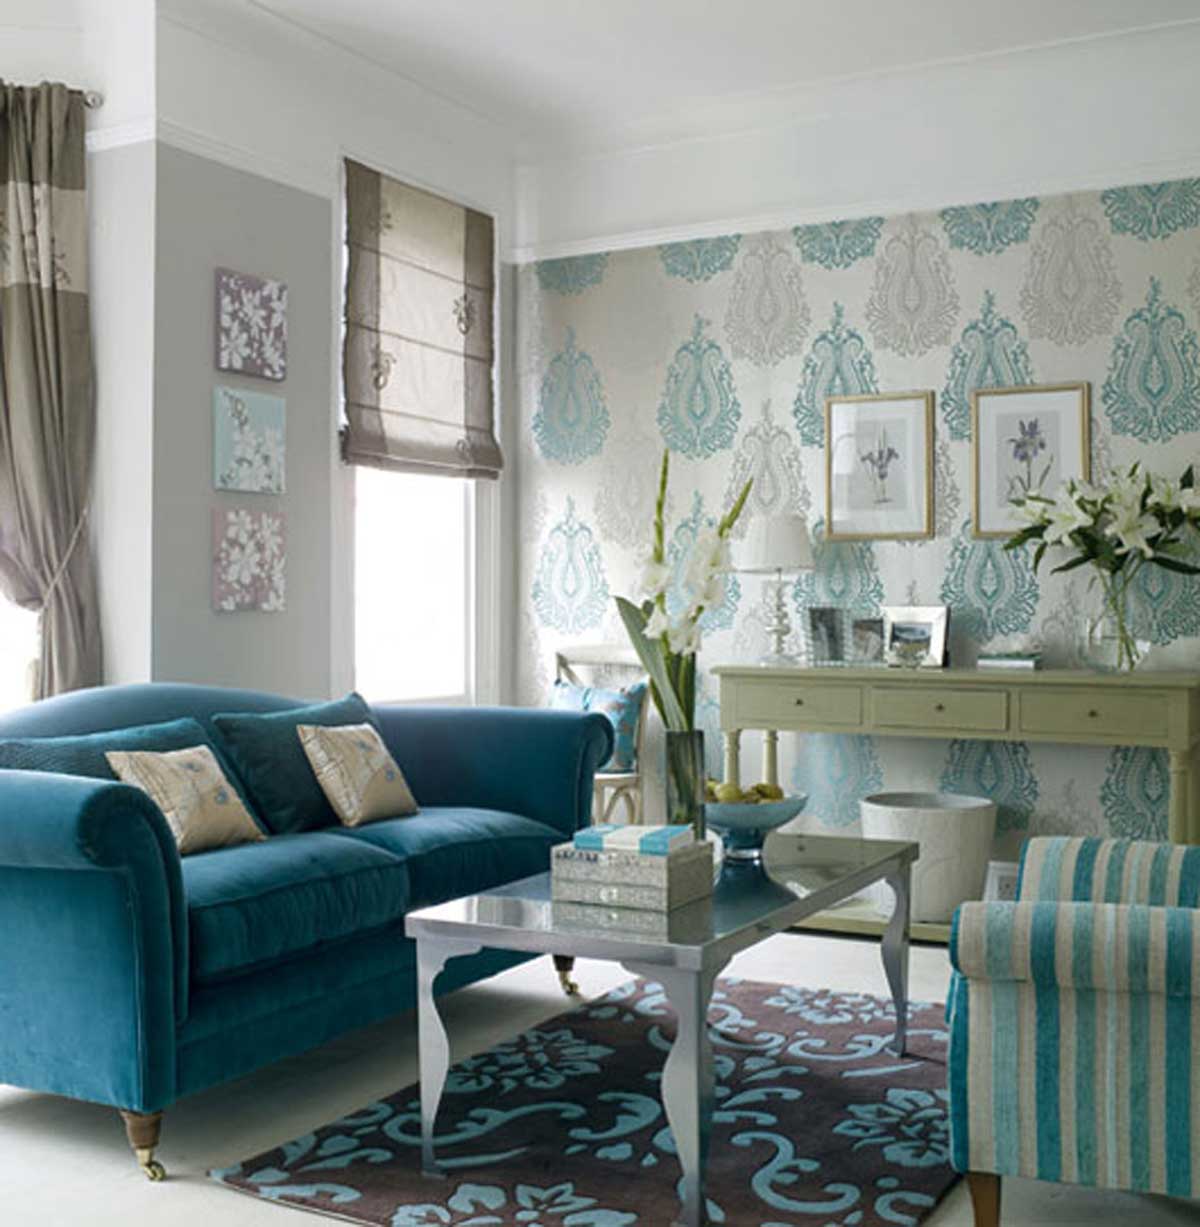 30 Best Living Room Wallpaper Ideas - The WoW Style